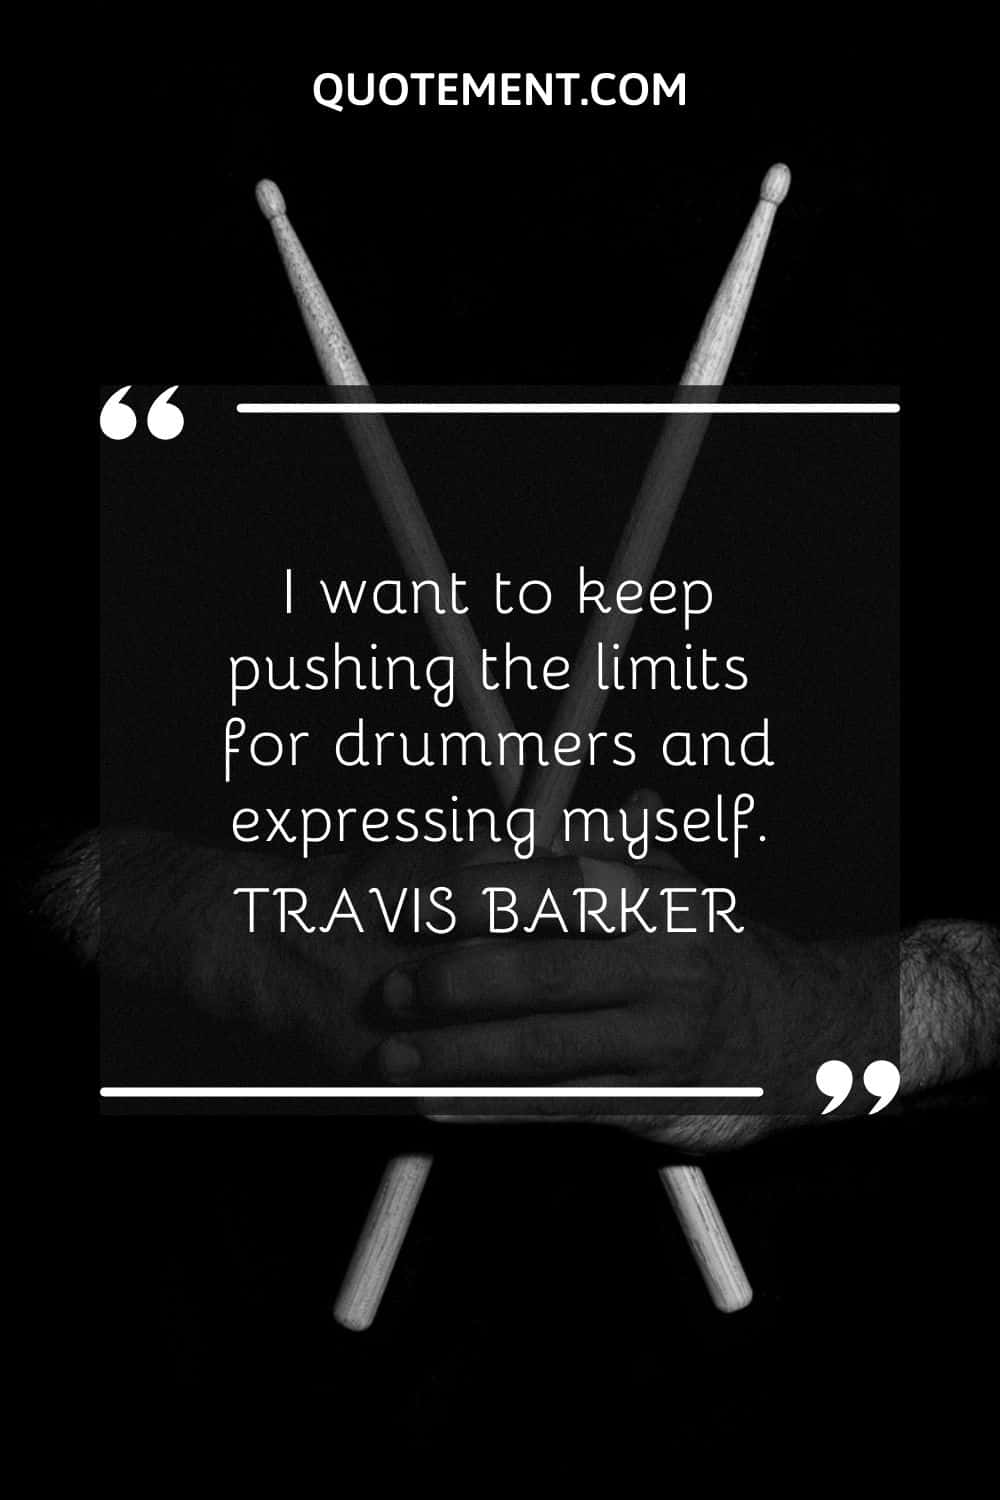 I want to keep pushing the limits for drummers and expressing myself